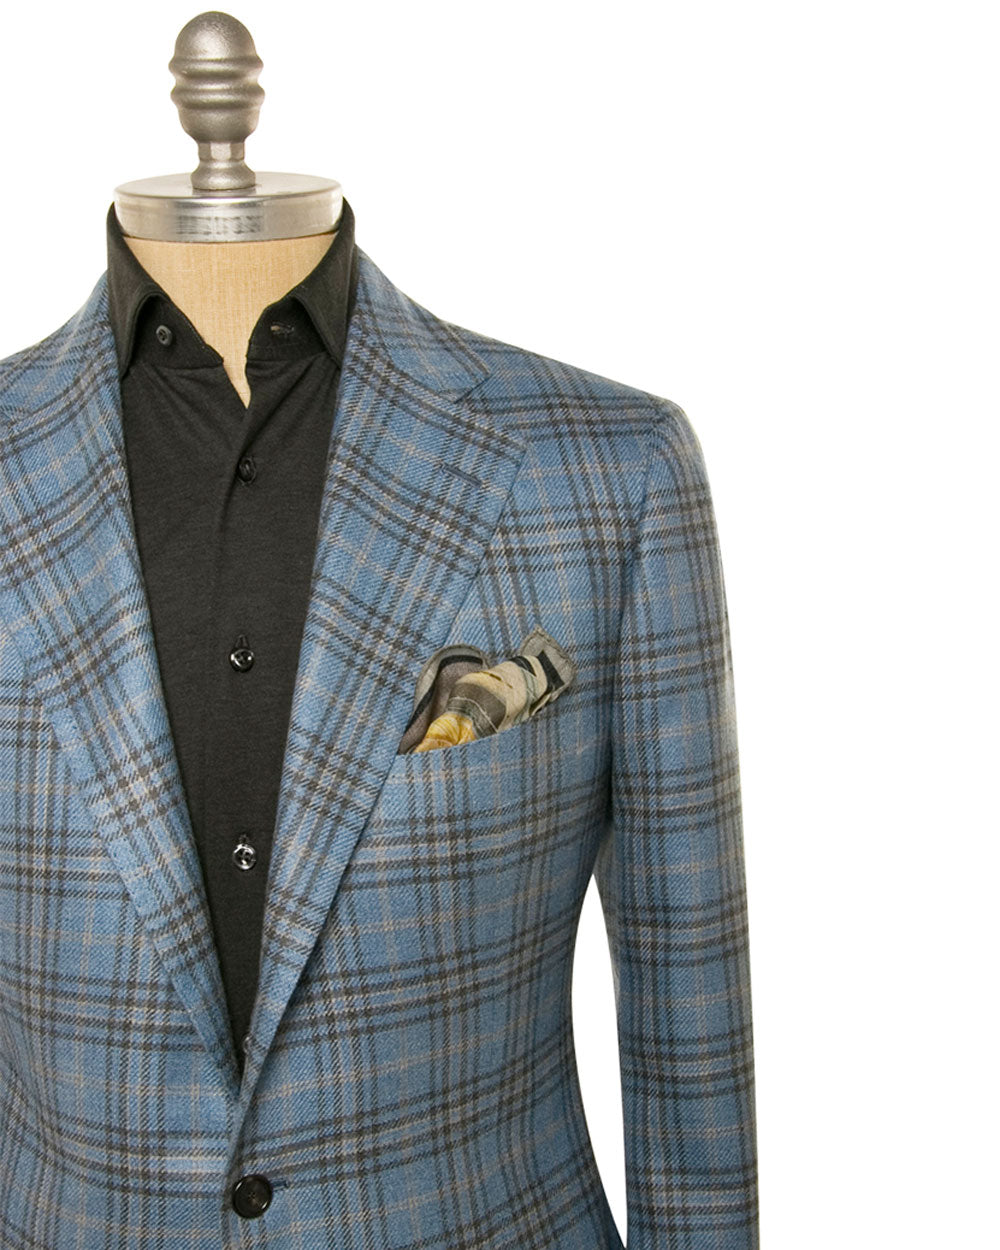 Sky Blue and Tan Plaid Sportcoat